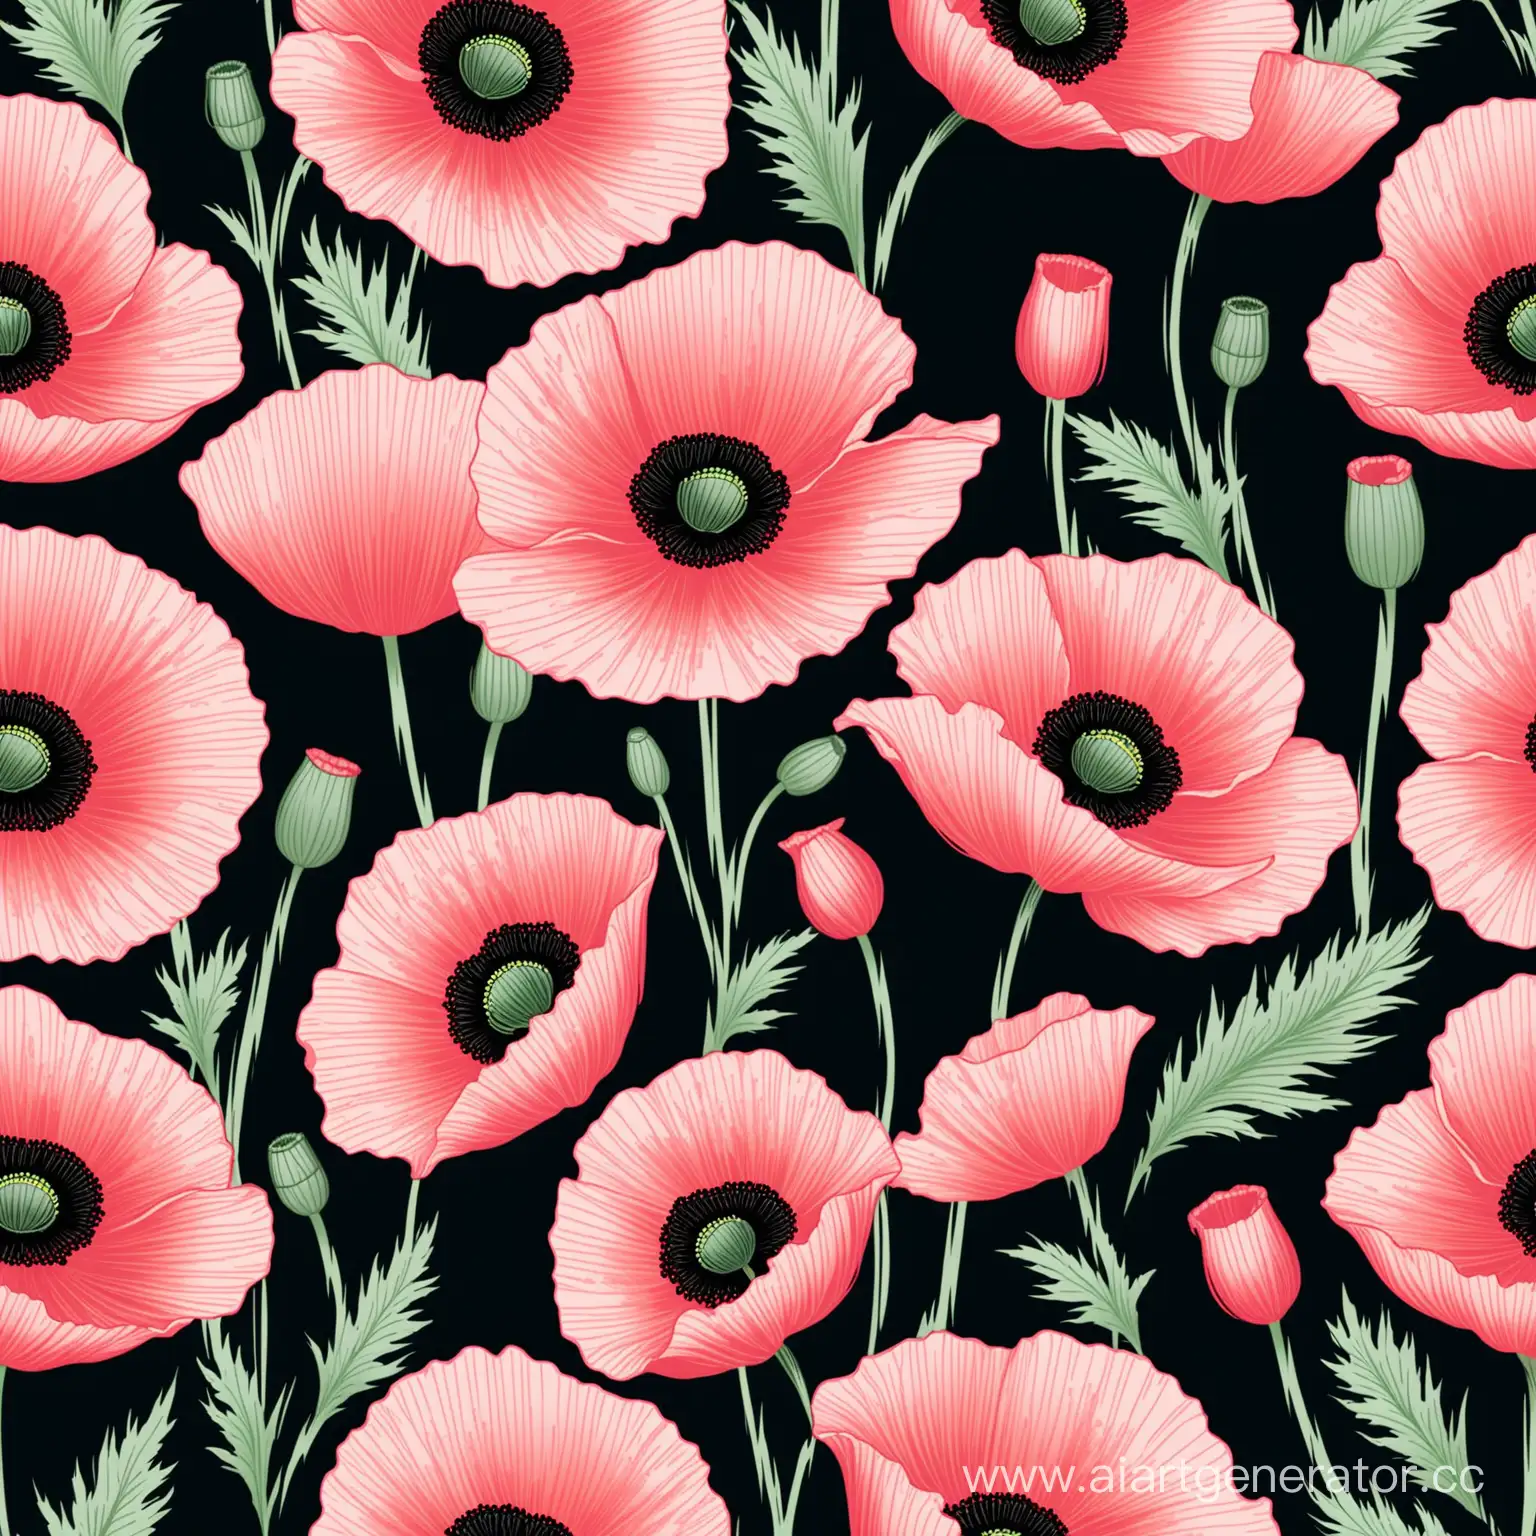 Seamless-Pattern-of-Poppies-Flowers-on-Light-PinkBlack-Background-for-Textile-Design